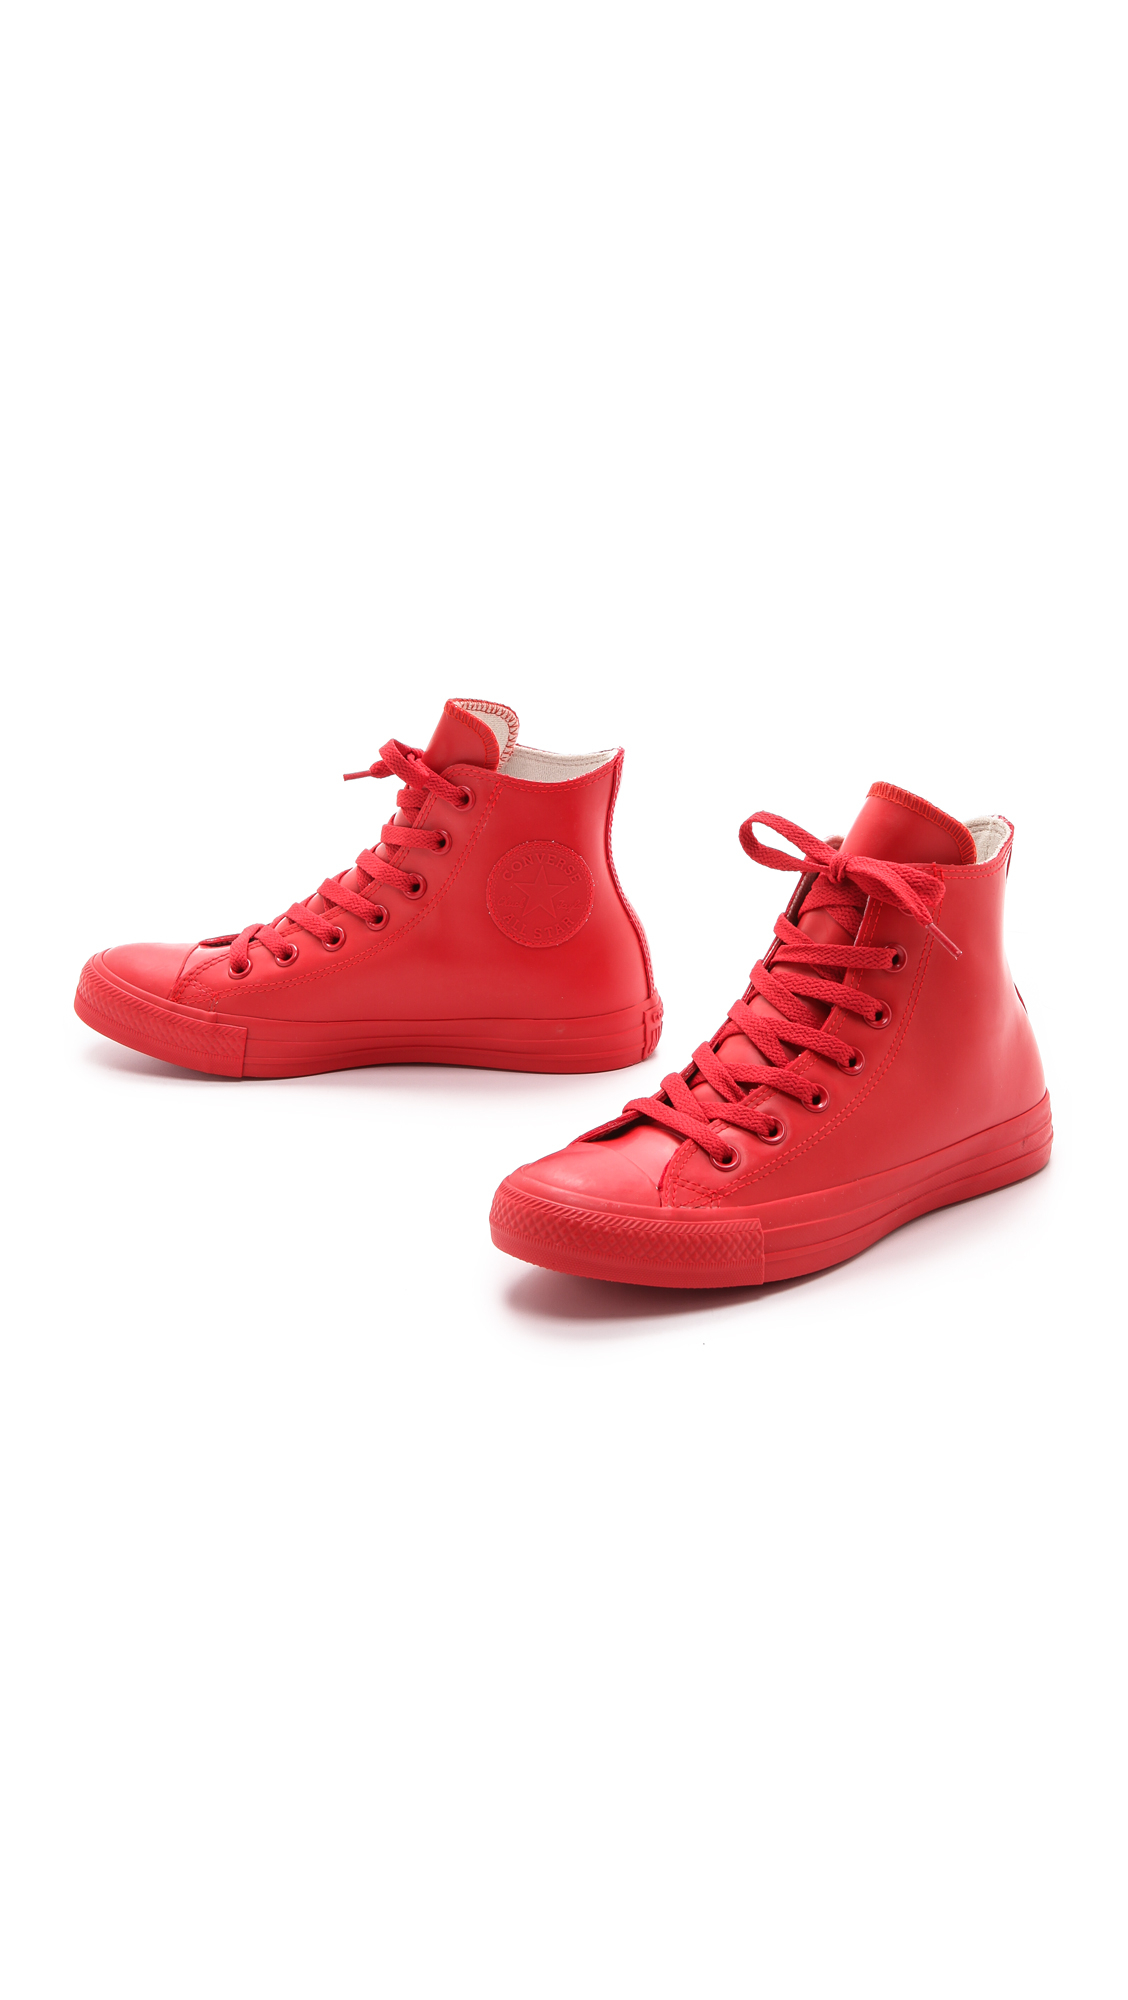 Converse Rubber Coated Chuck Taylor All Star Sneakers - Red Lyst